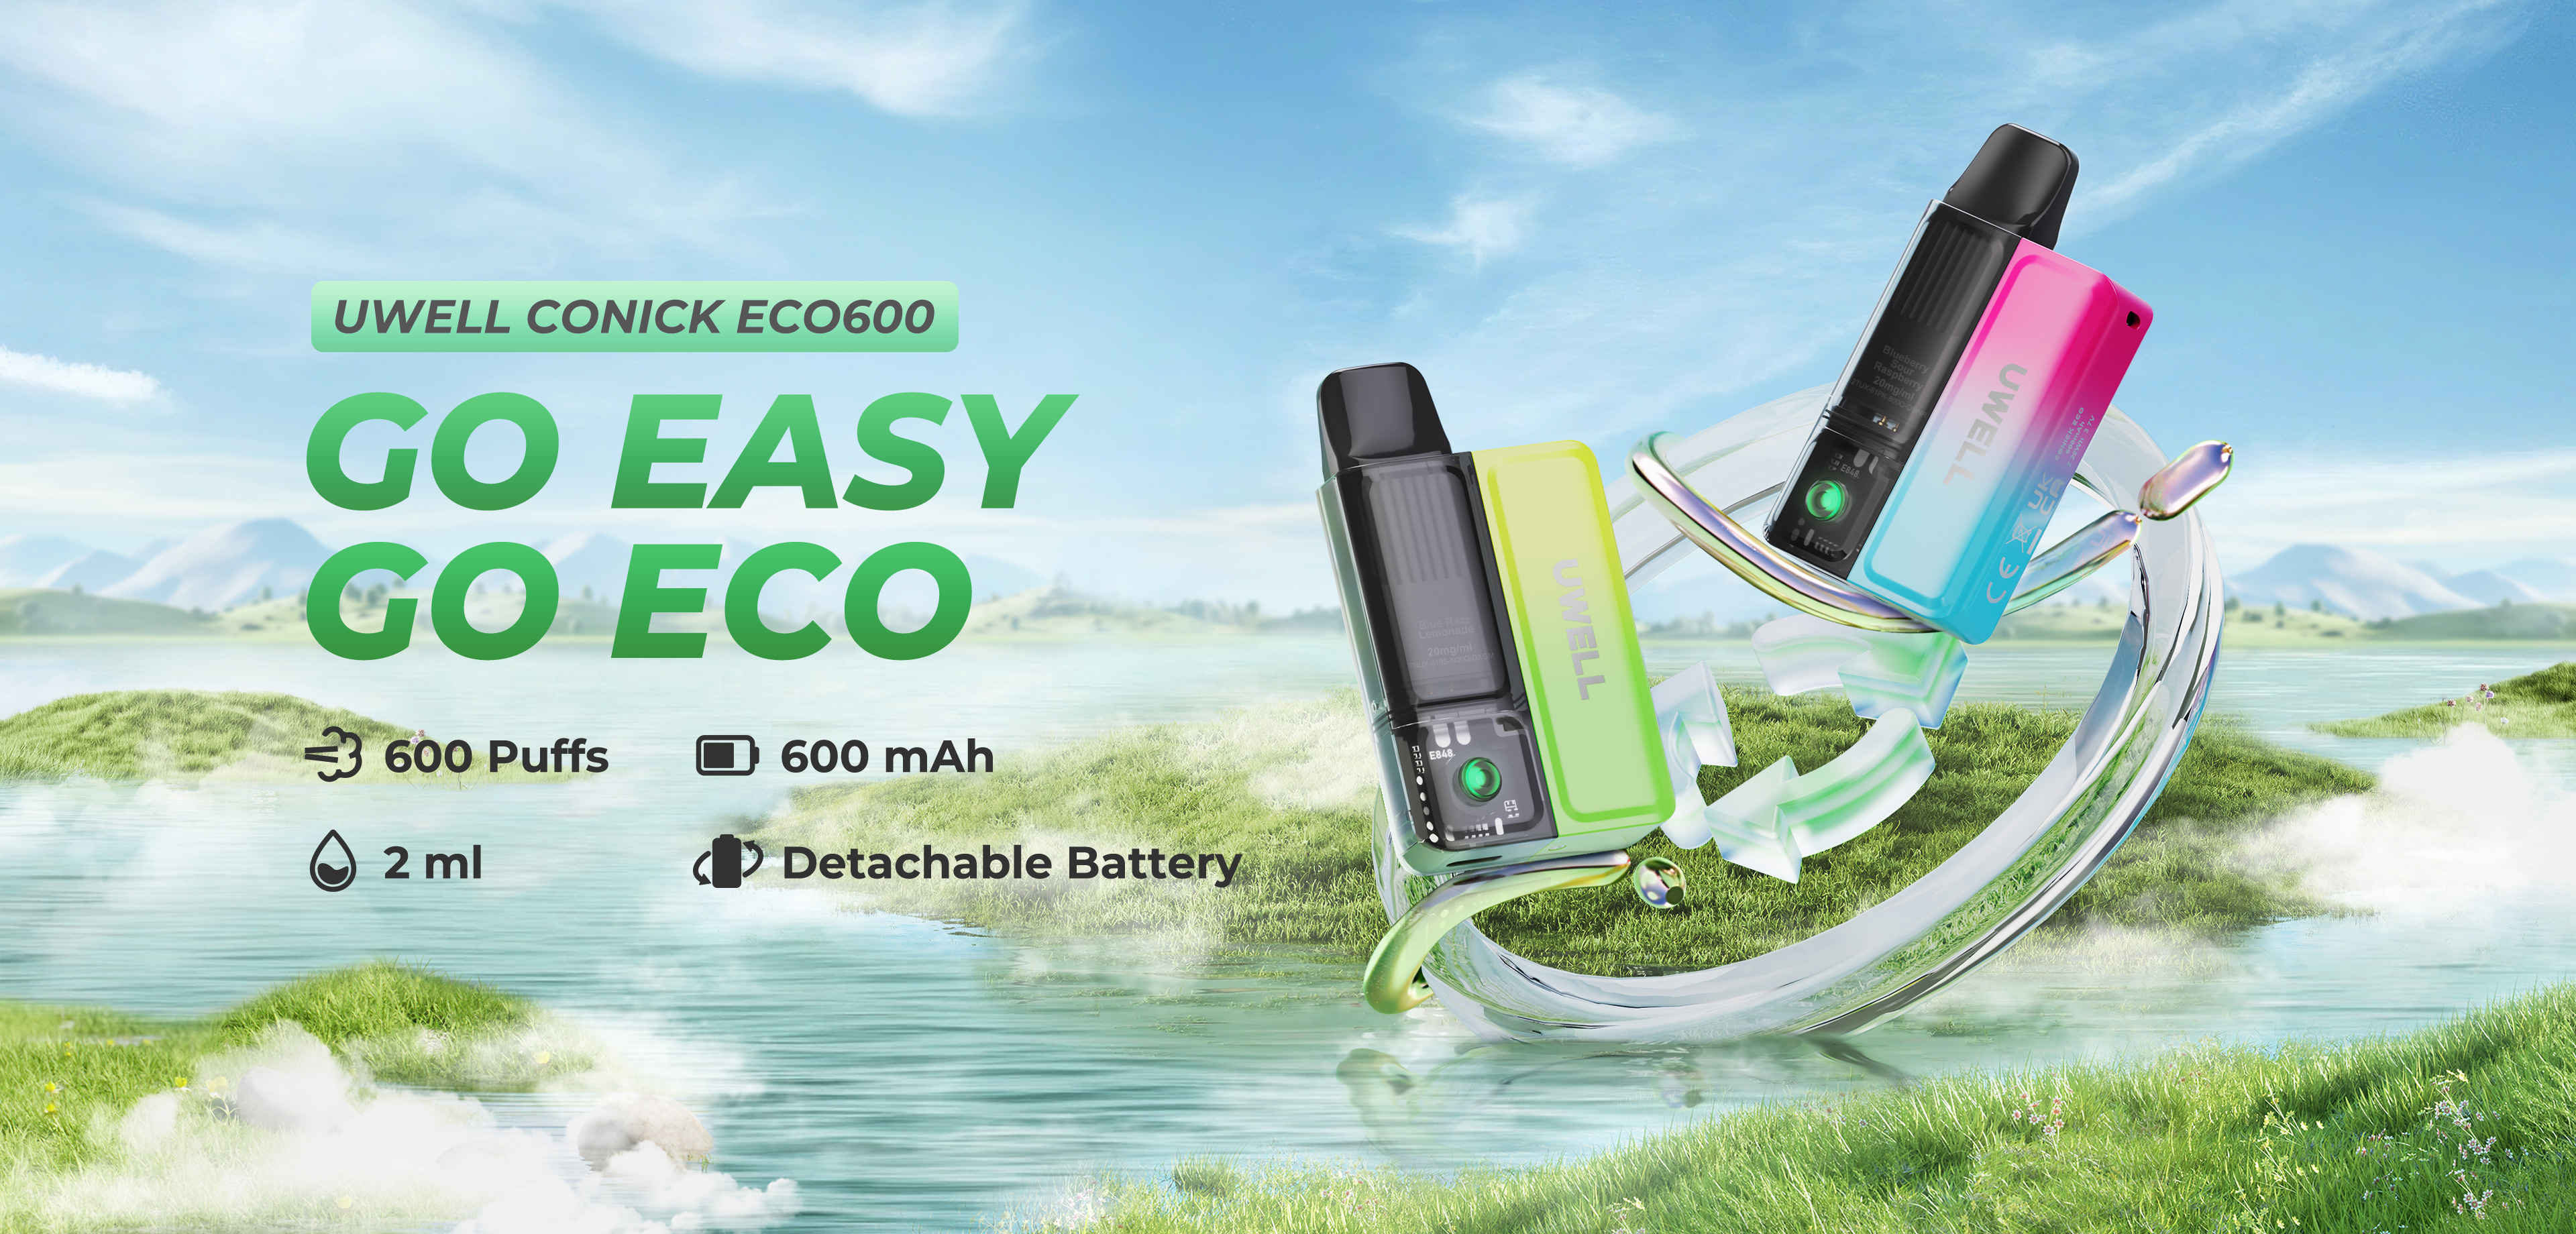 UWELL Introduces the CONICK ECO600